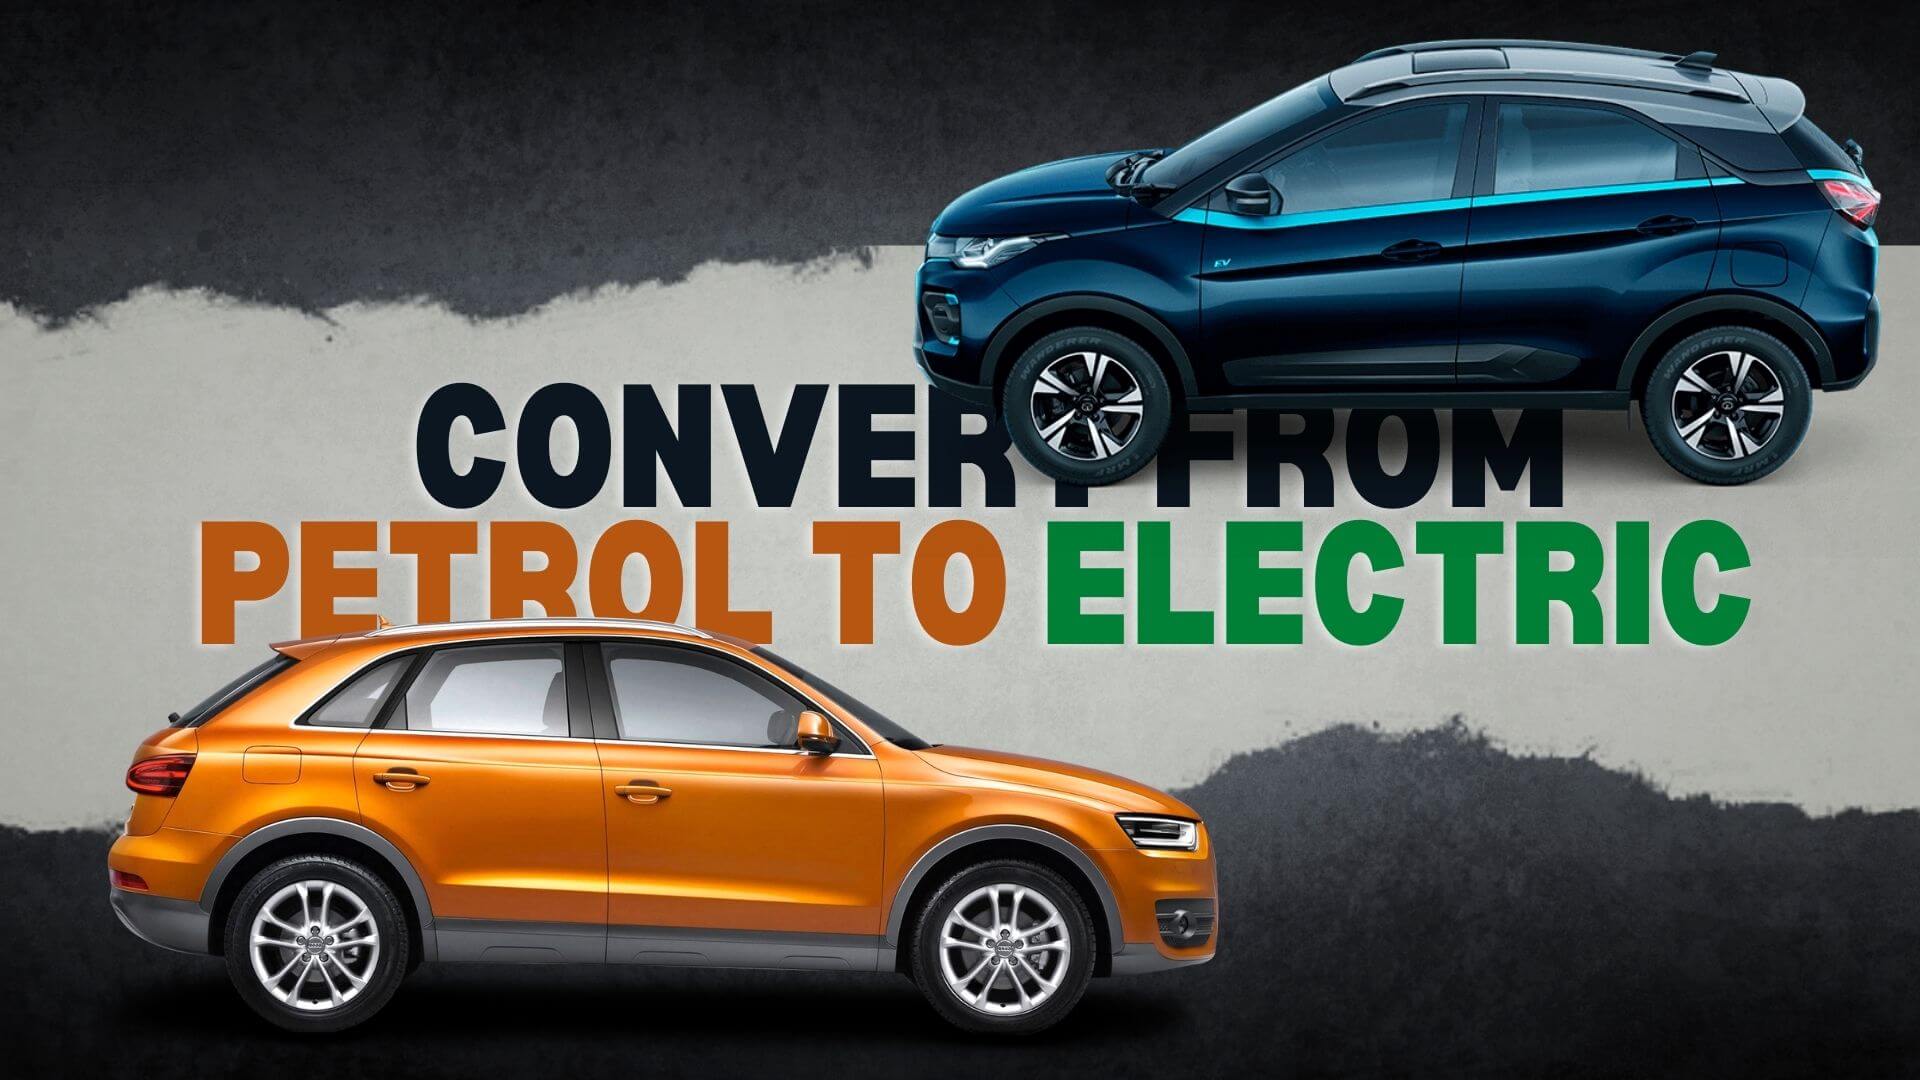 How to Convert Petrol Car to Electric Car? Watch Video EVehicleinfo